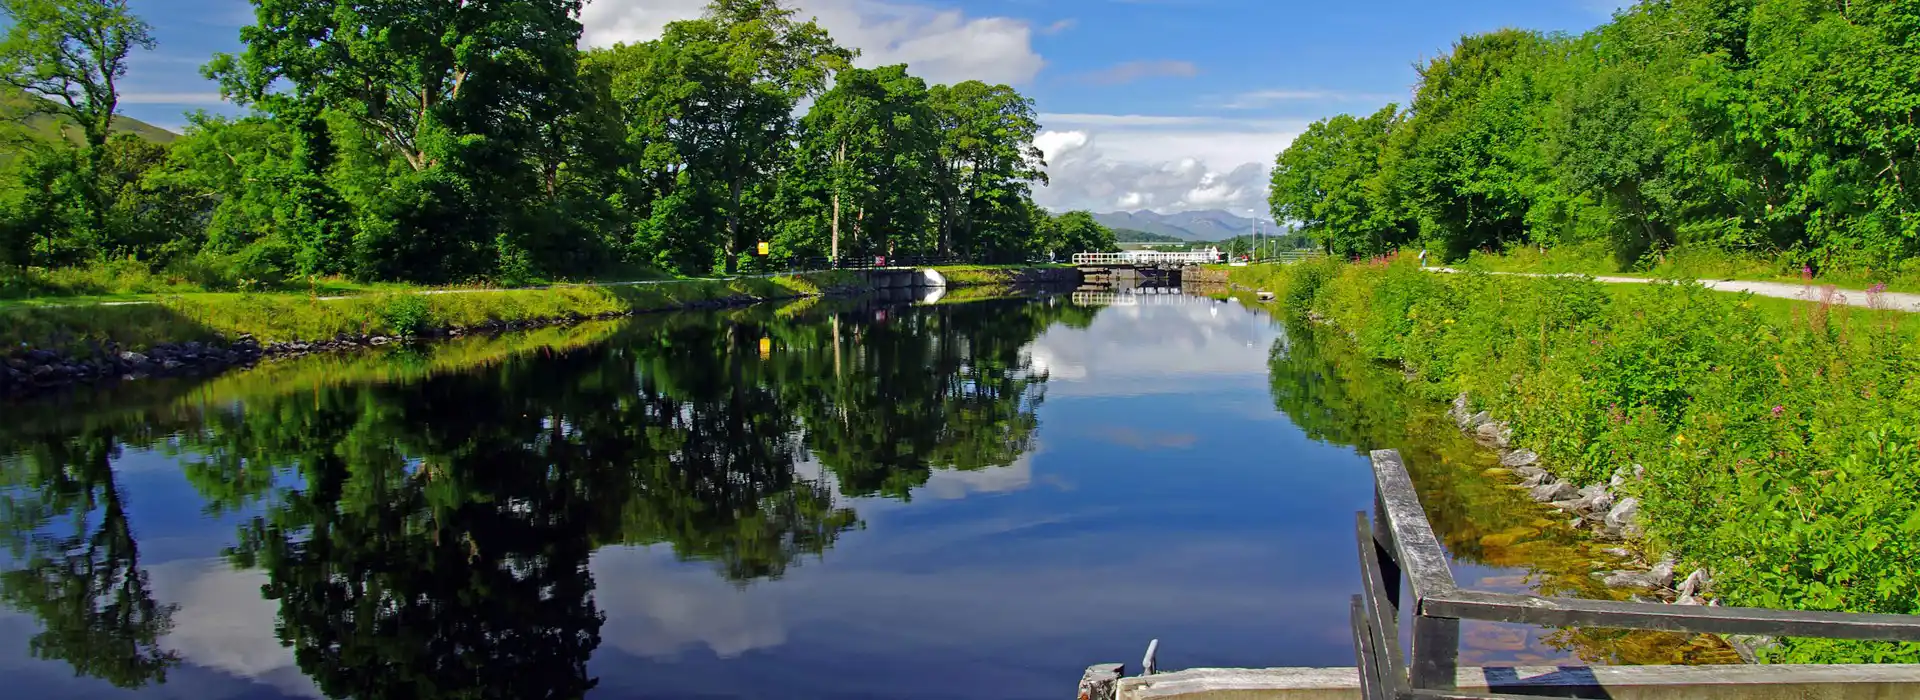 Campsites near the Caledonian Canal